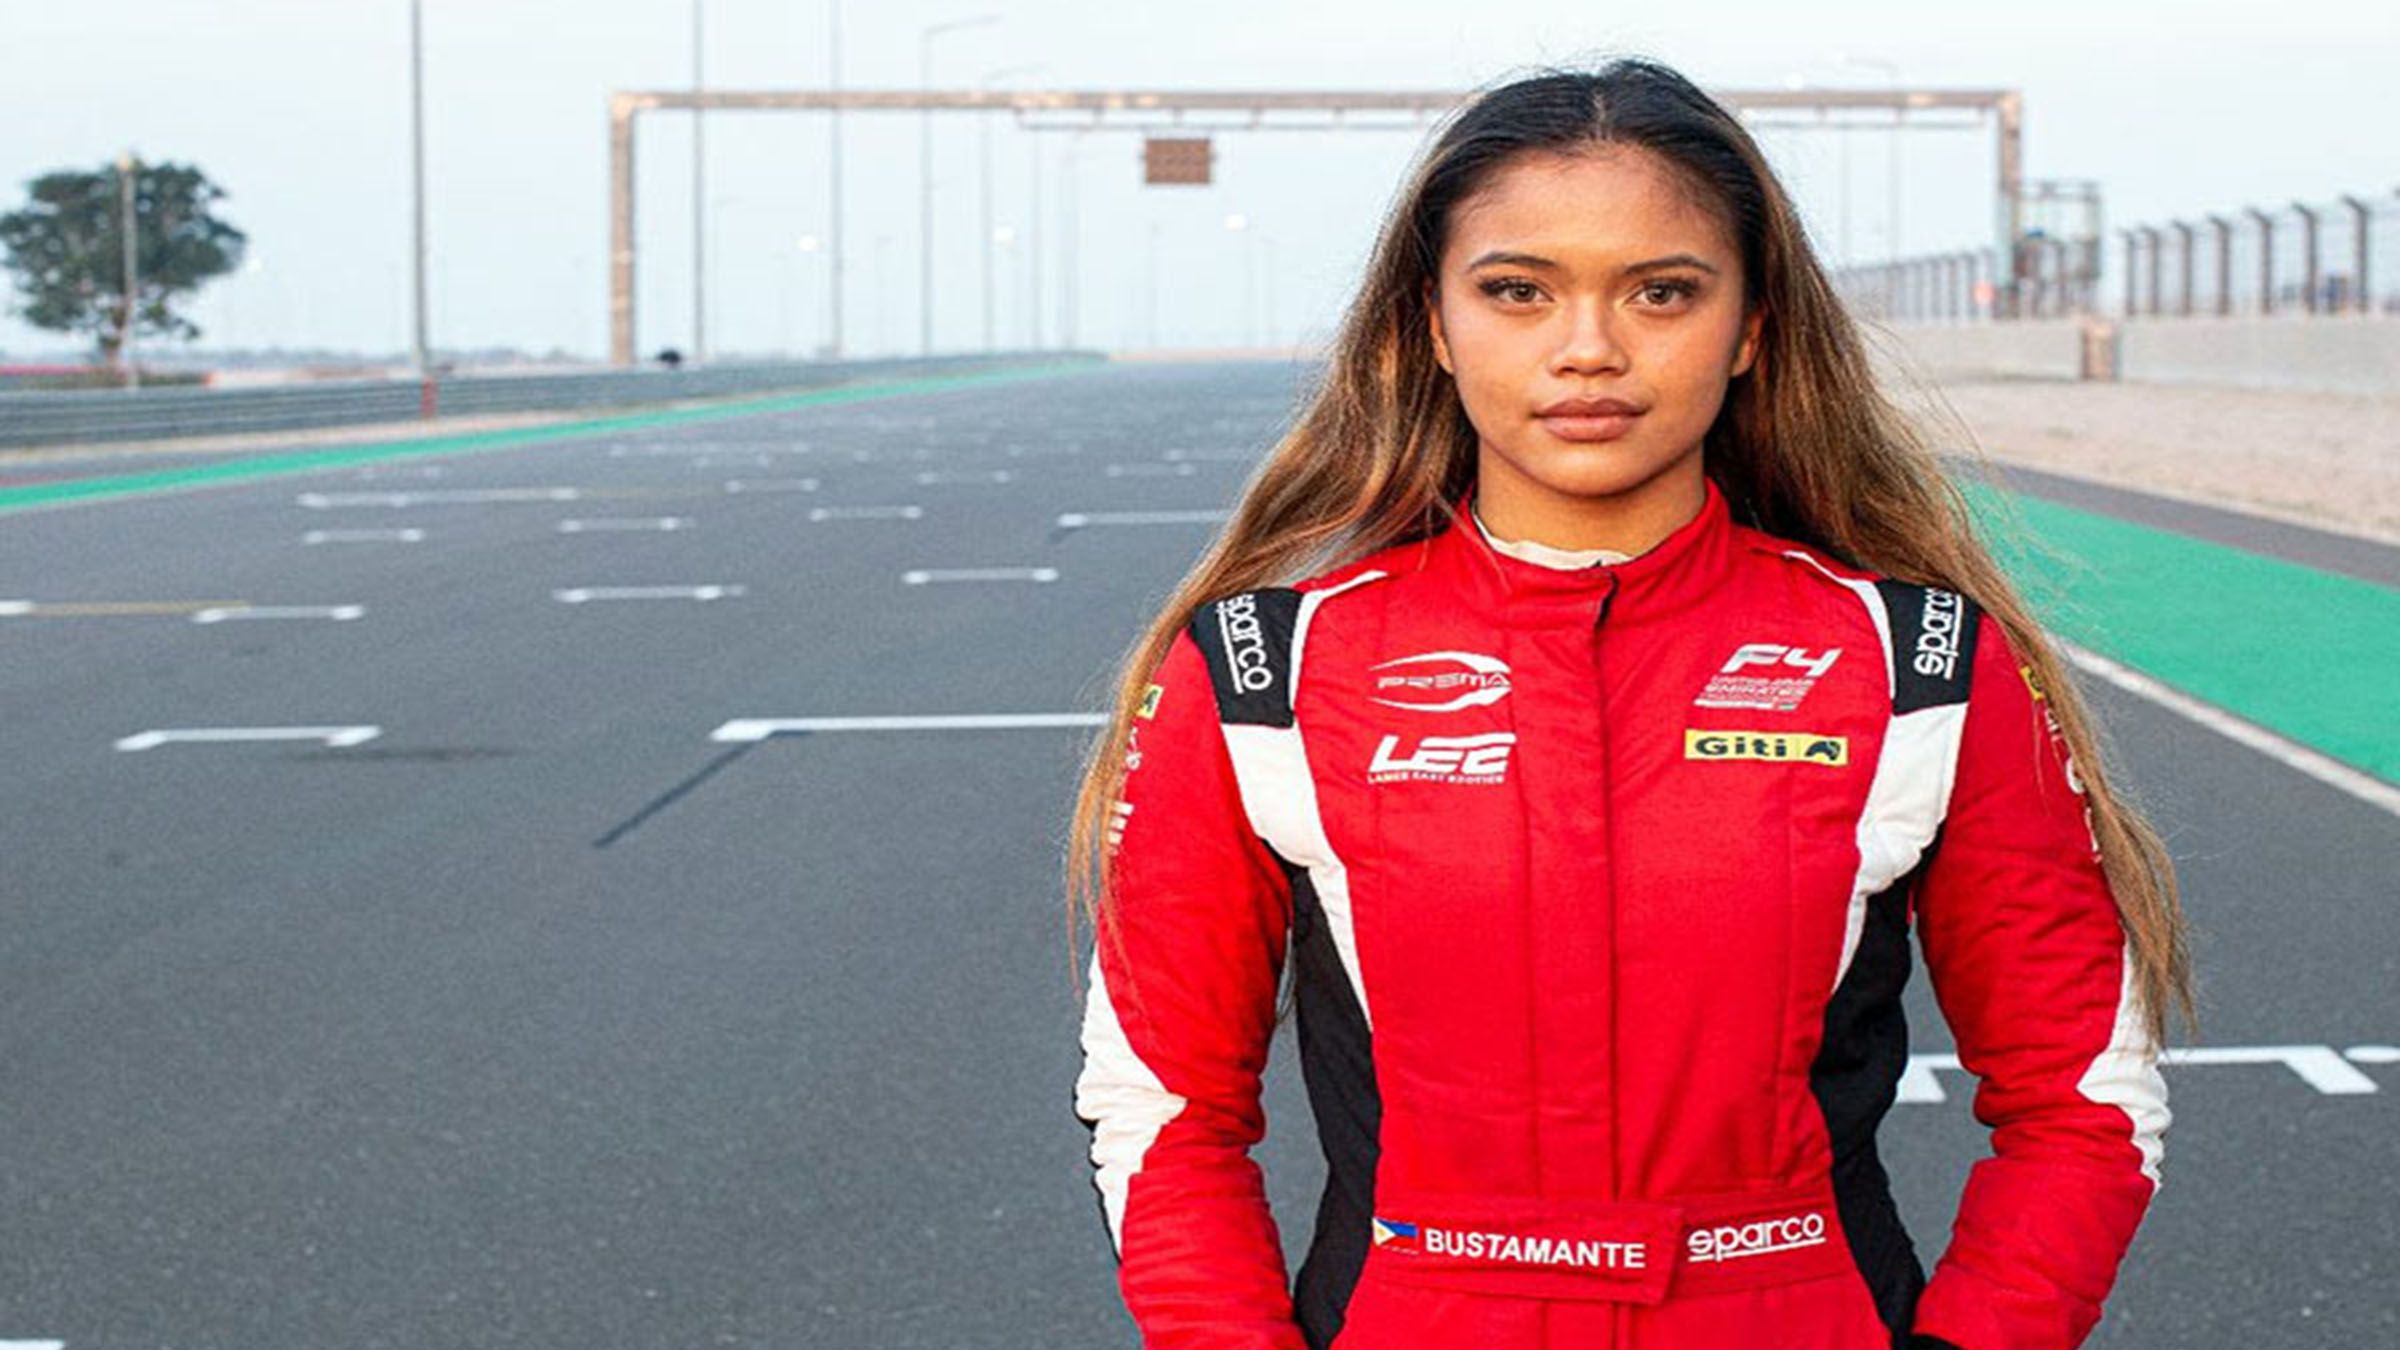 Bustamante to race at the inaugural F1 Academy with PREMA